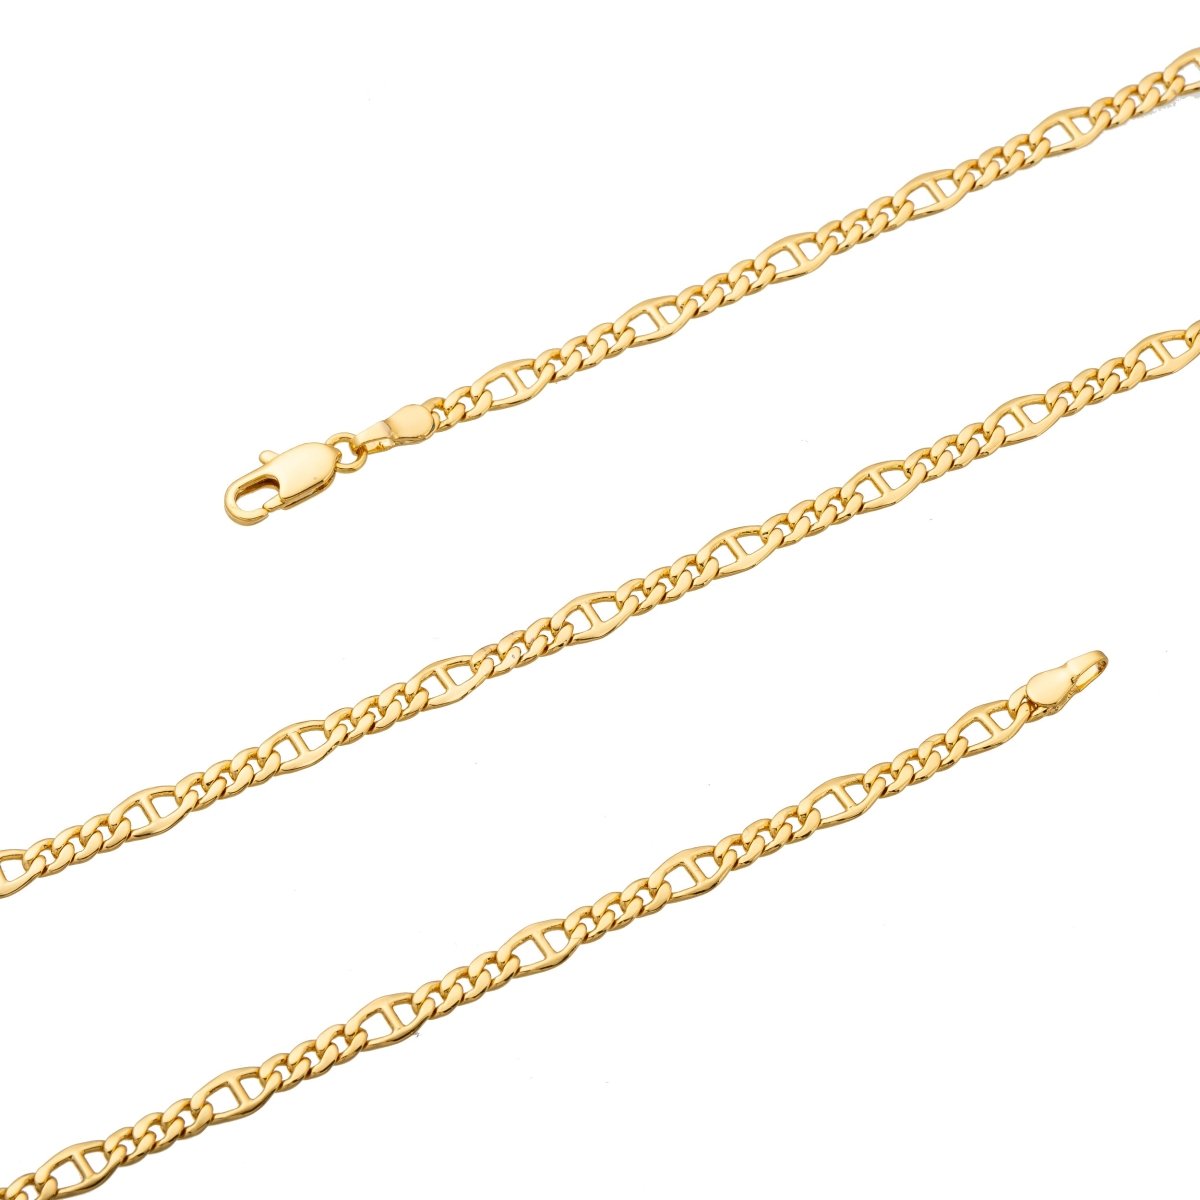 24K Gold Filled Mariner Chain Necklace, 23.5Inch Mariner Finished Chain Necklace For Jewelry Making, 4mm Width Mariner Necklace w/ Lobster Clasps | CN-157 Clearance Pricing - DLUXCA